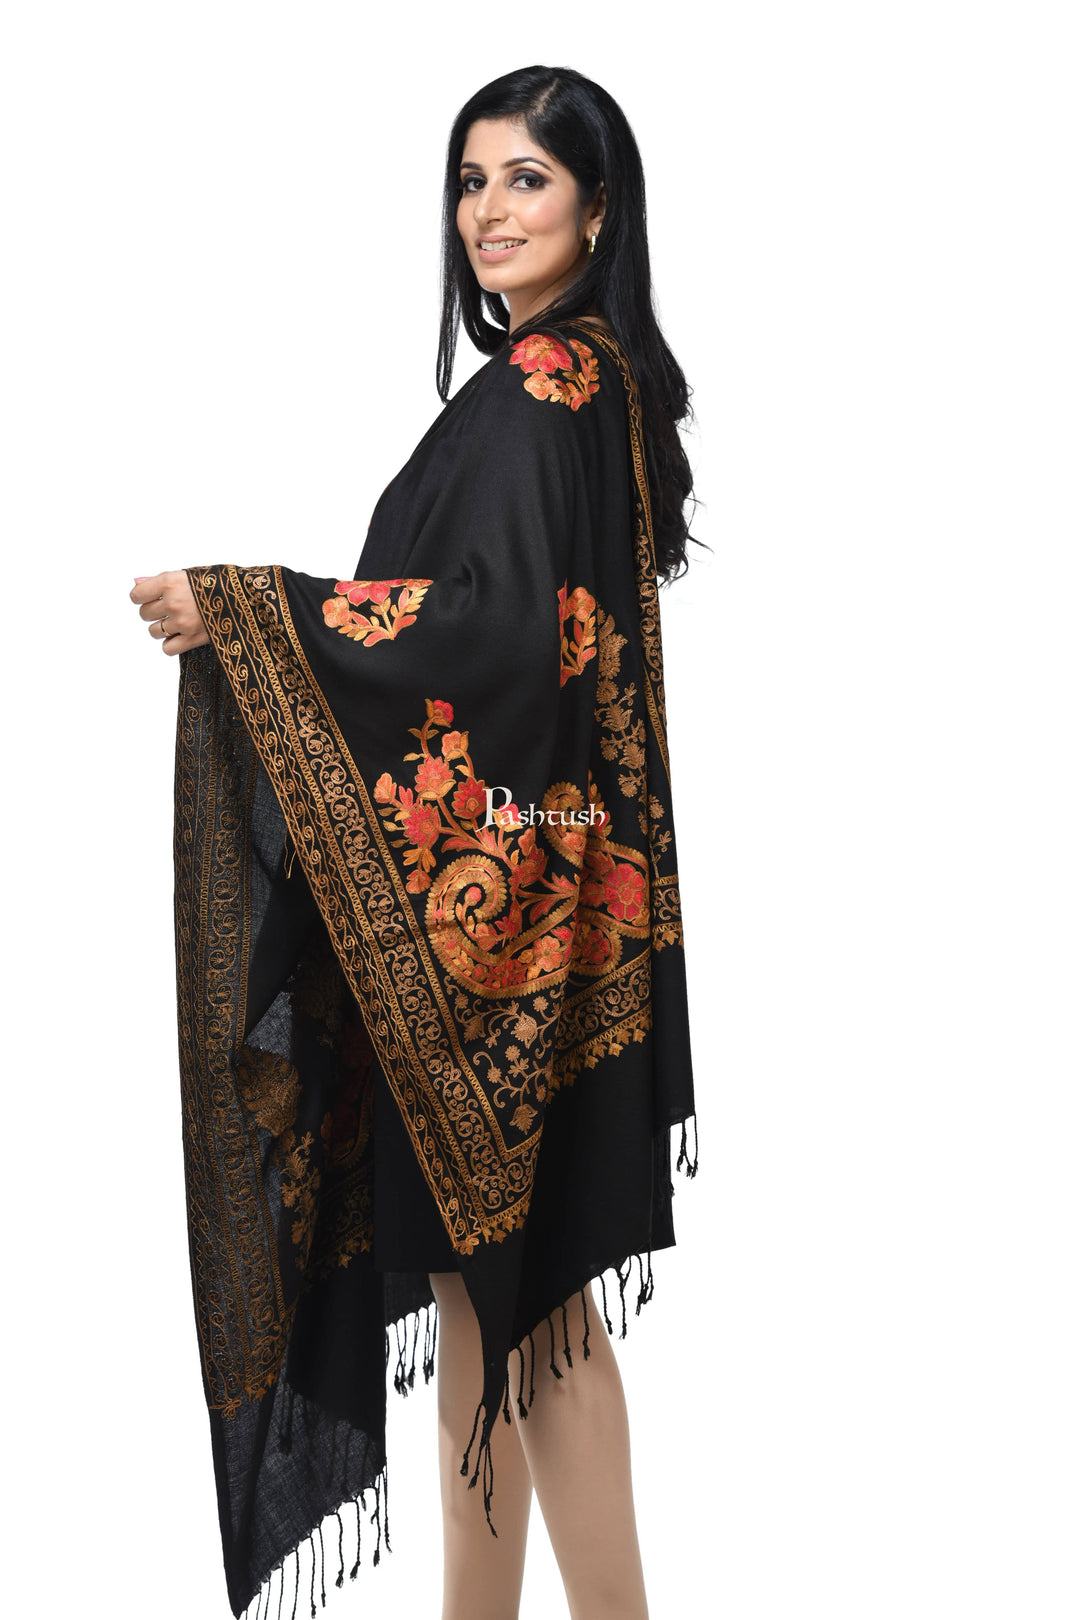 Pashwool Womens Stoles and Scarves Scarf Pashwool, Womens Kashmiri Aari Embroidery Stole, Soft Bamboo, Black